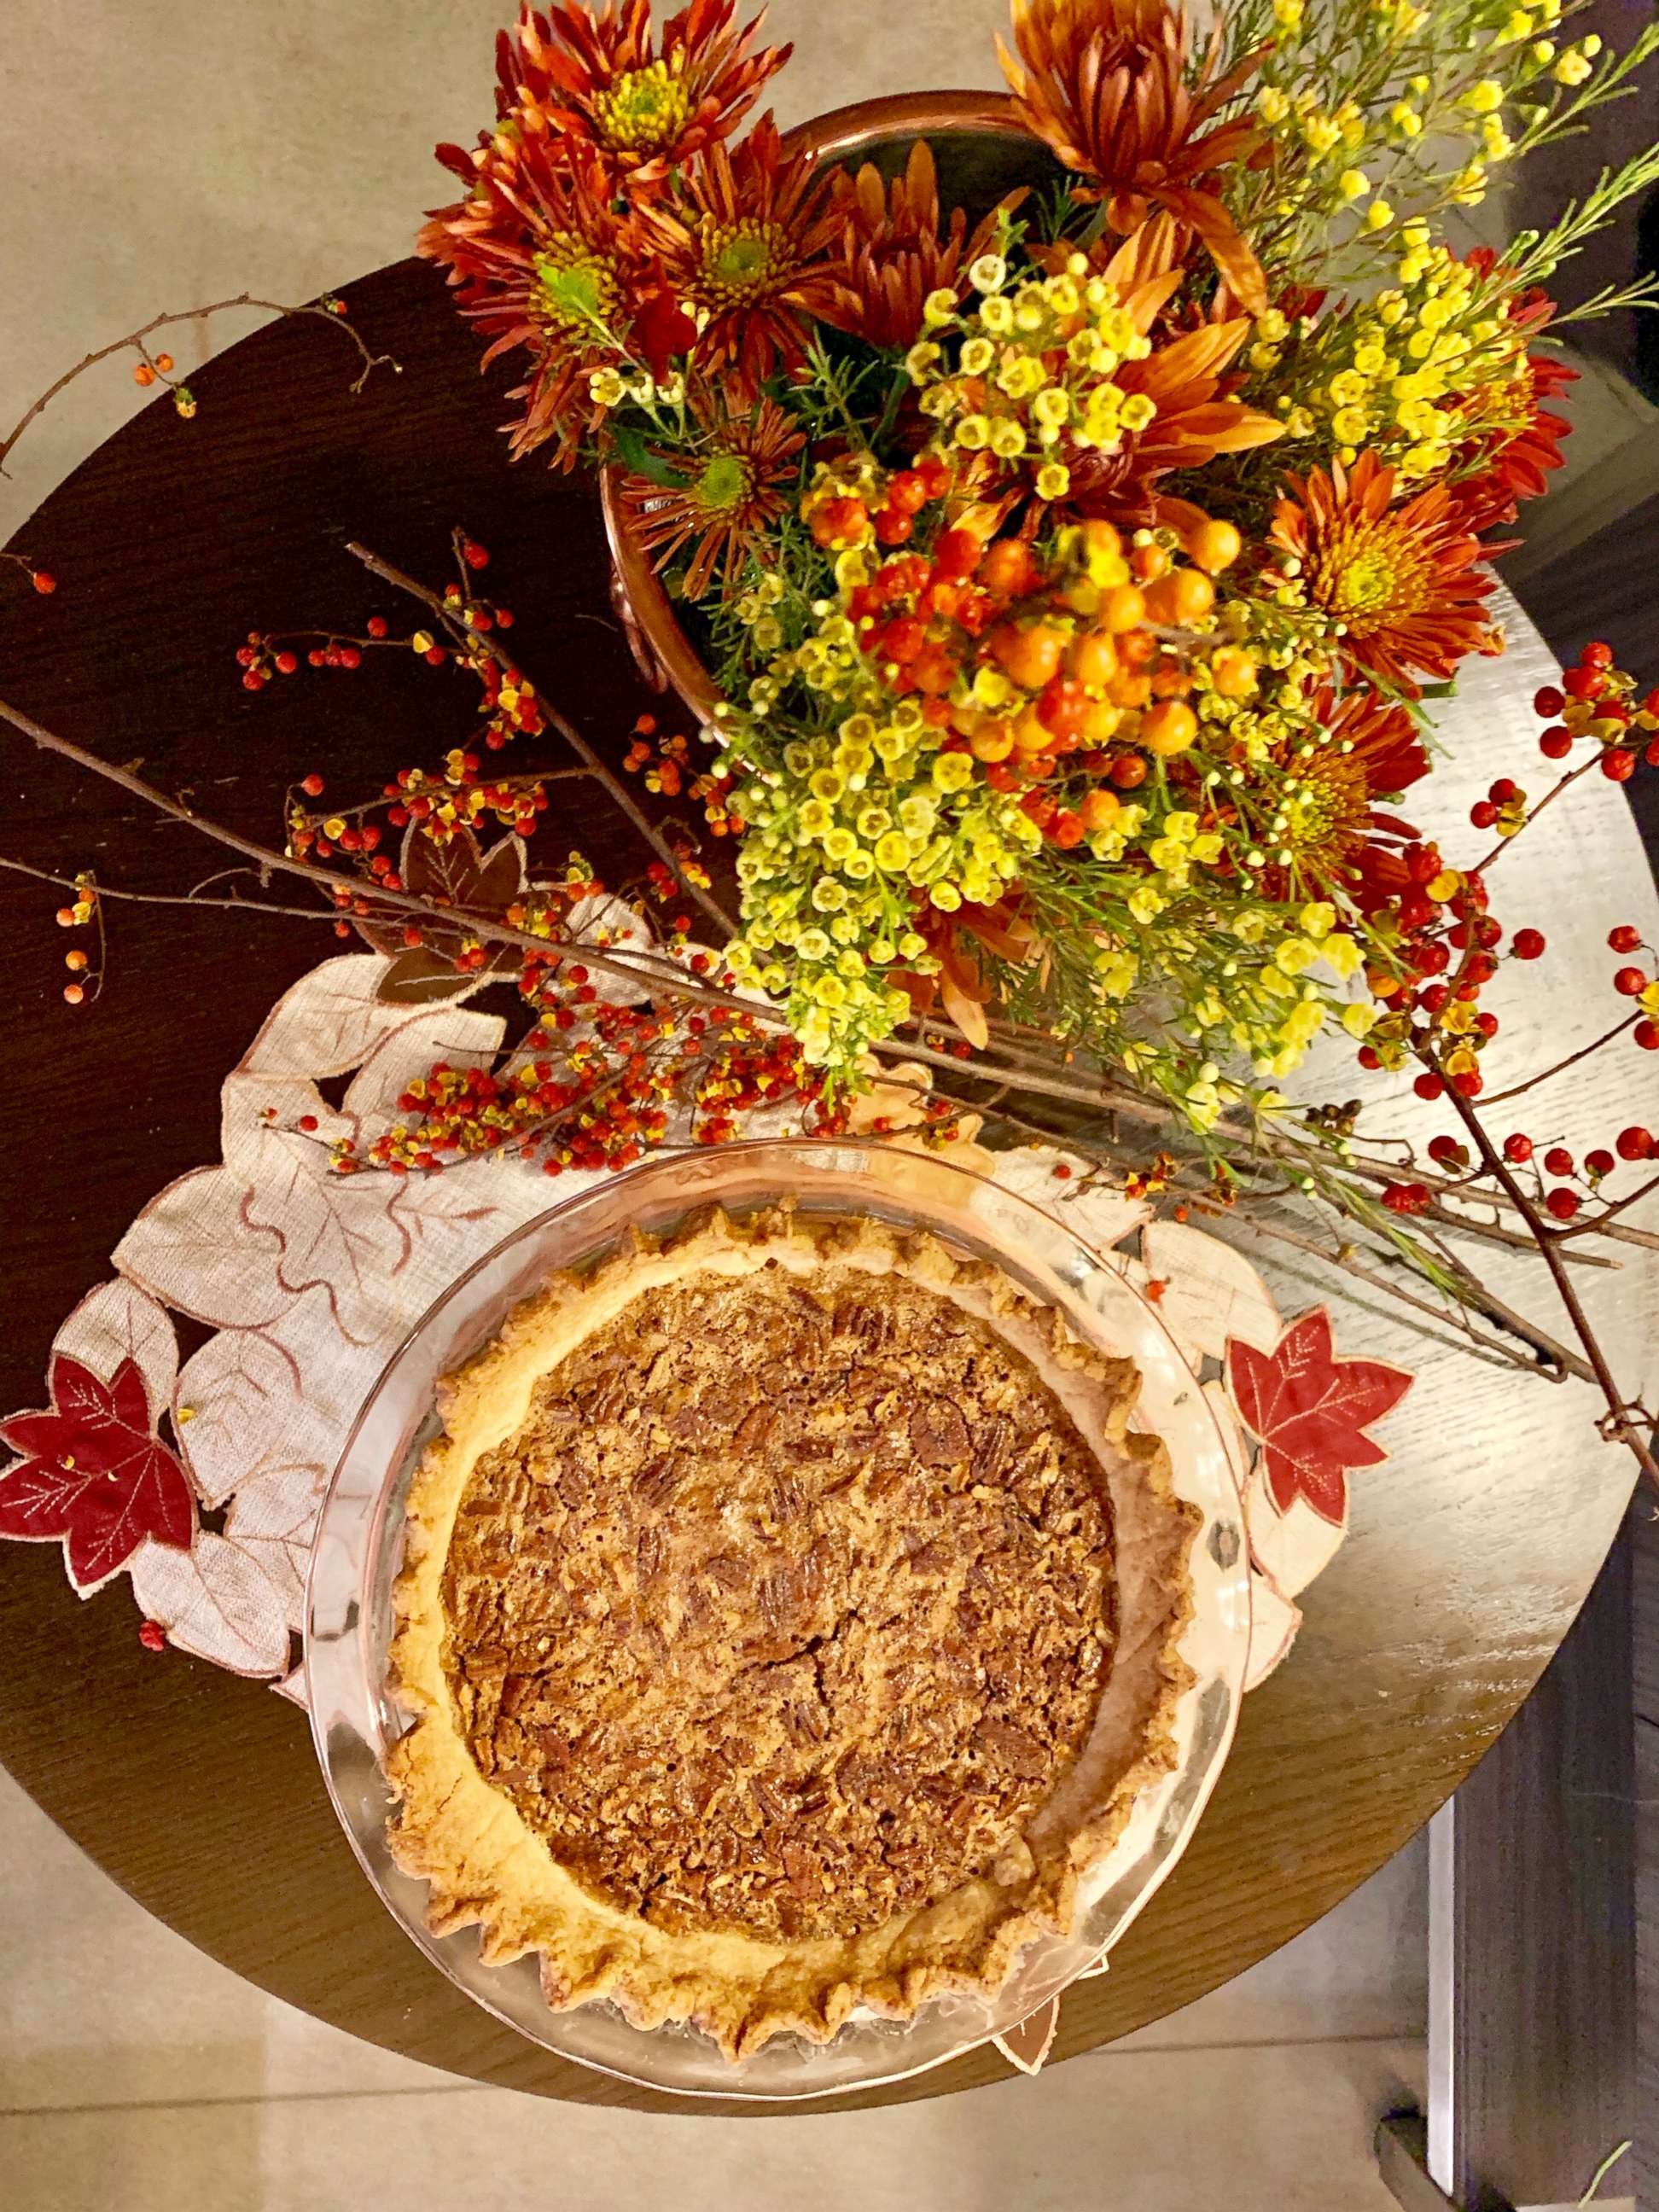 PHOTO: Fresh baked pecan pie made from the top Pinterest recipe.